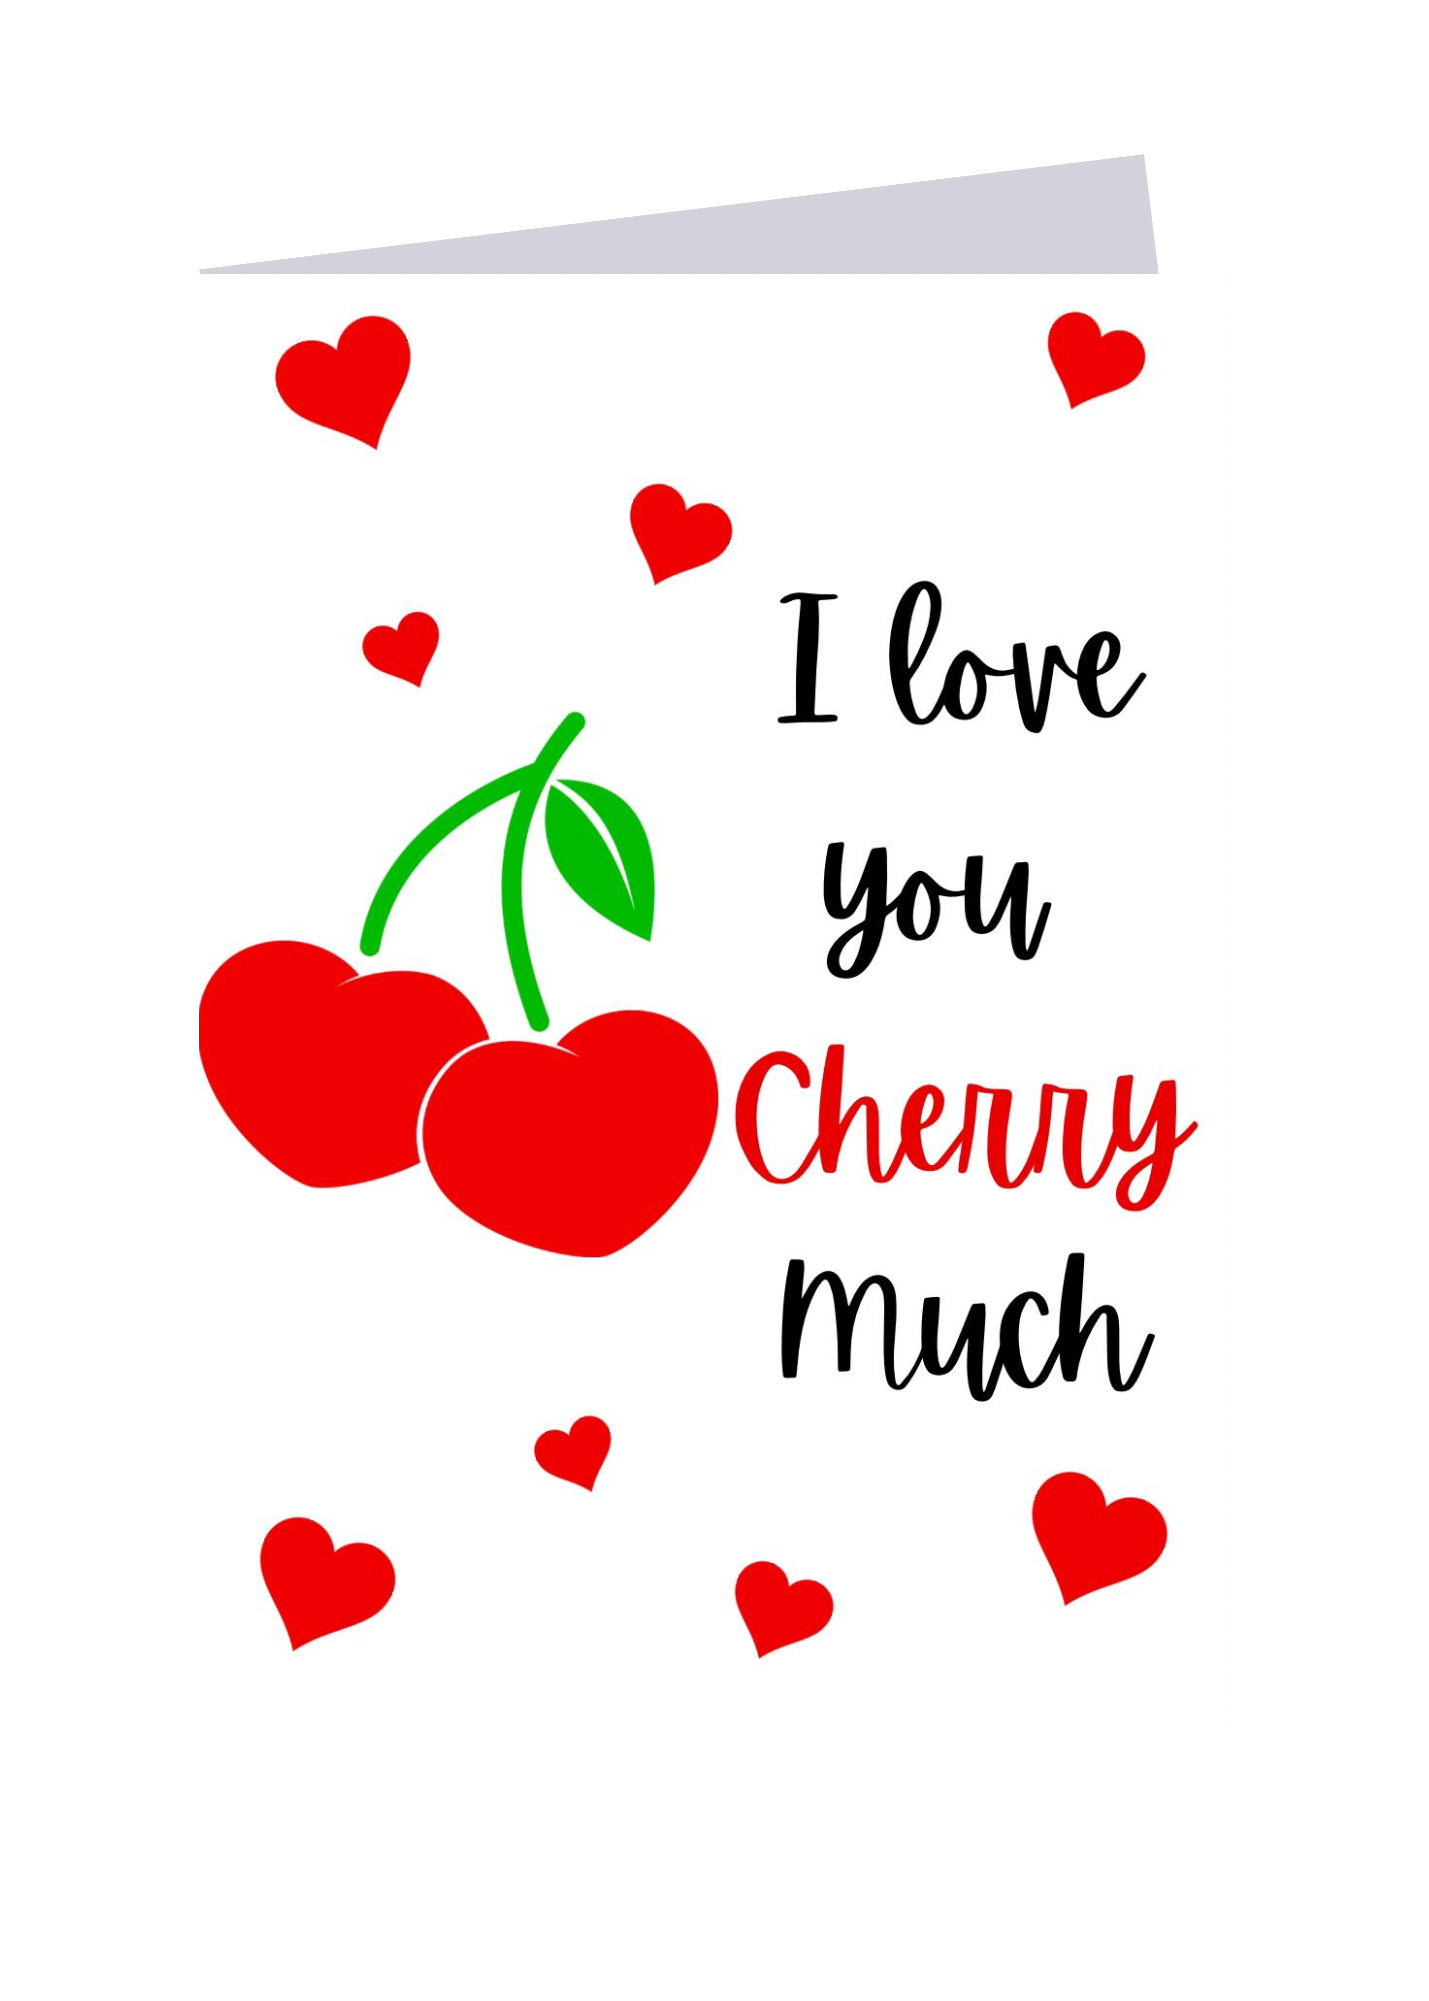 I love you CHERRY Much!